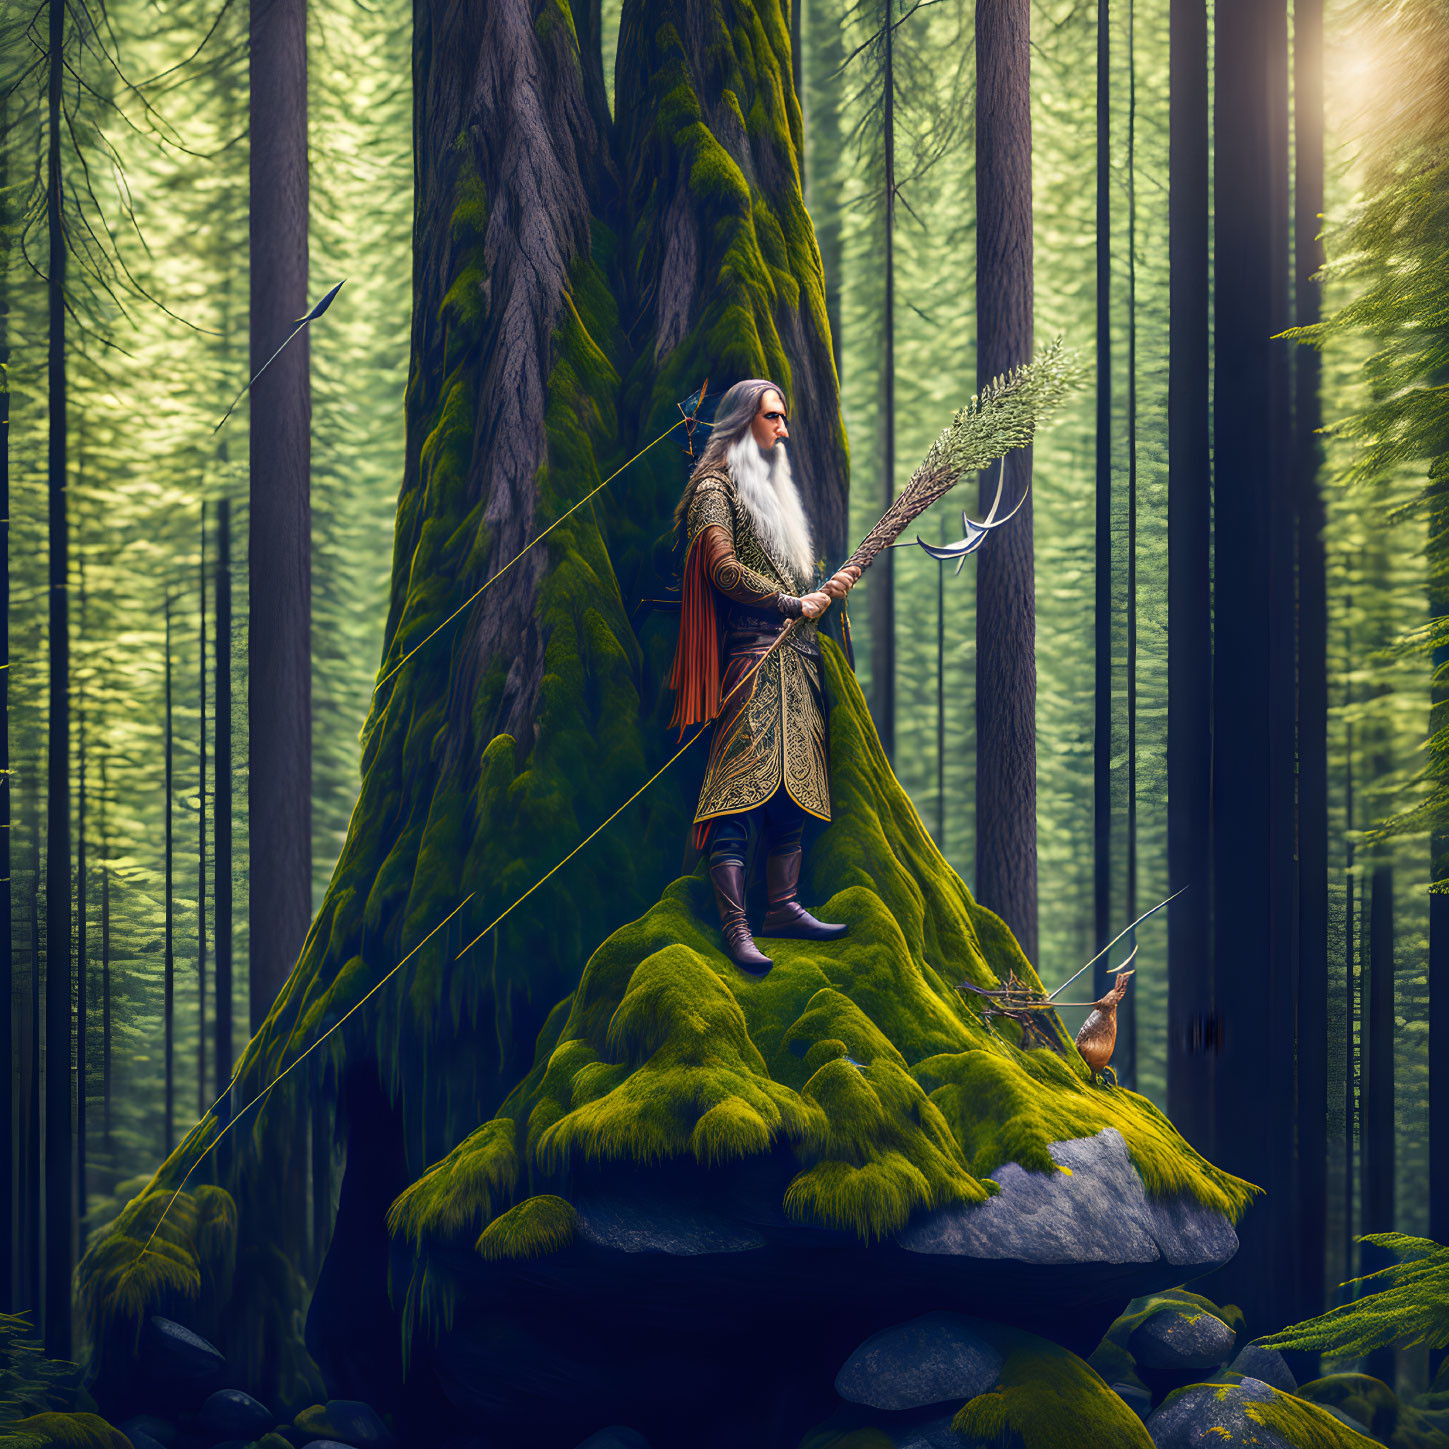 A man in the forest with bow and arrow 